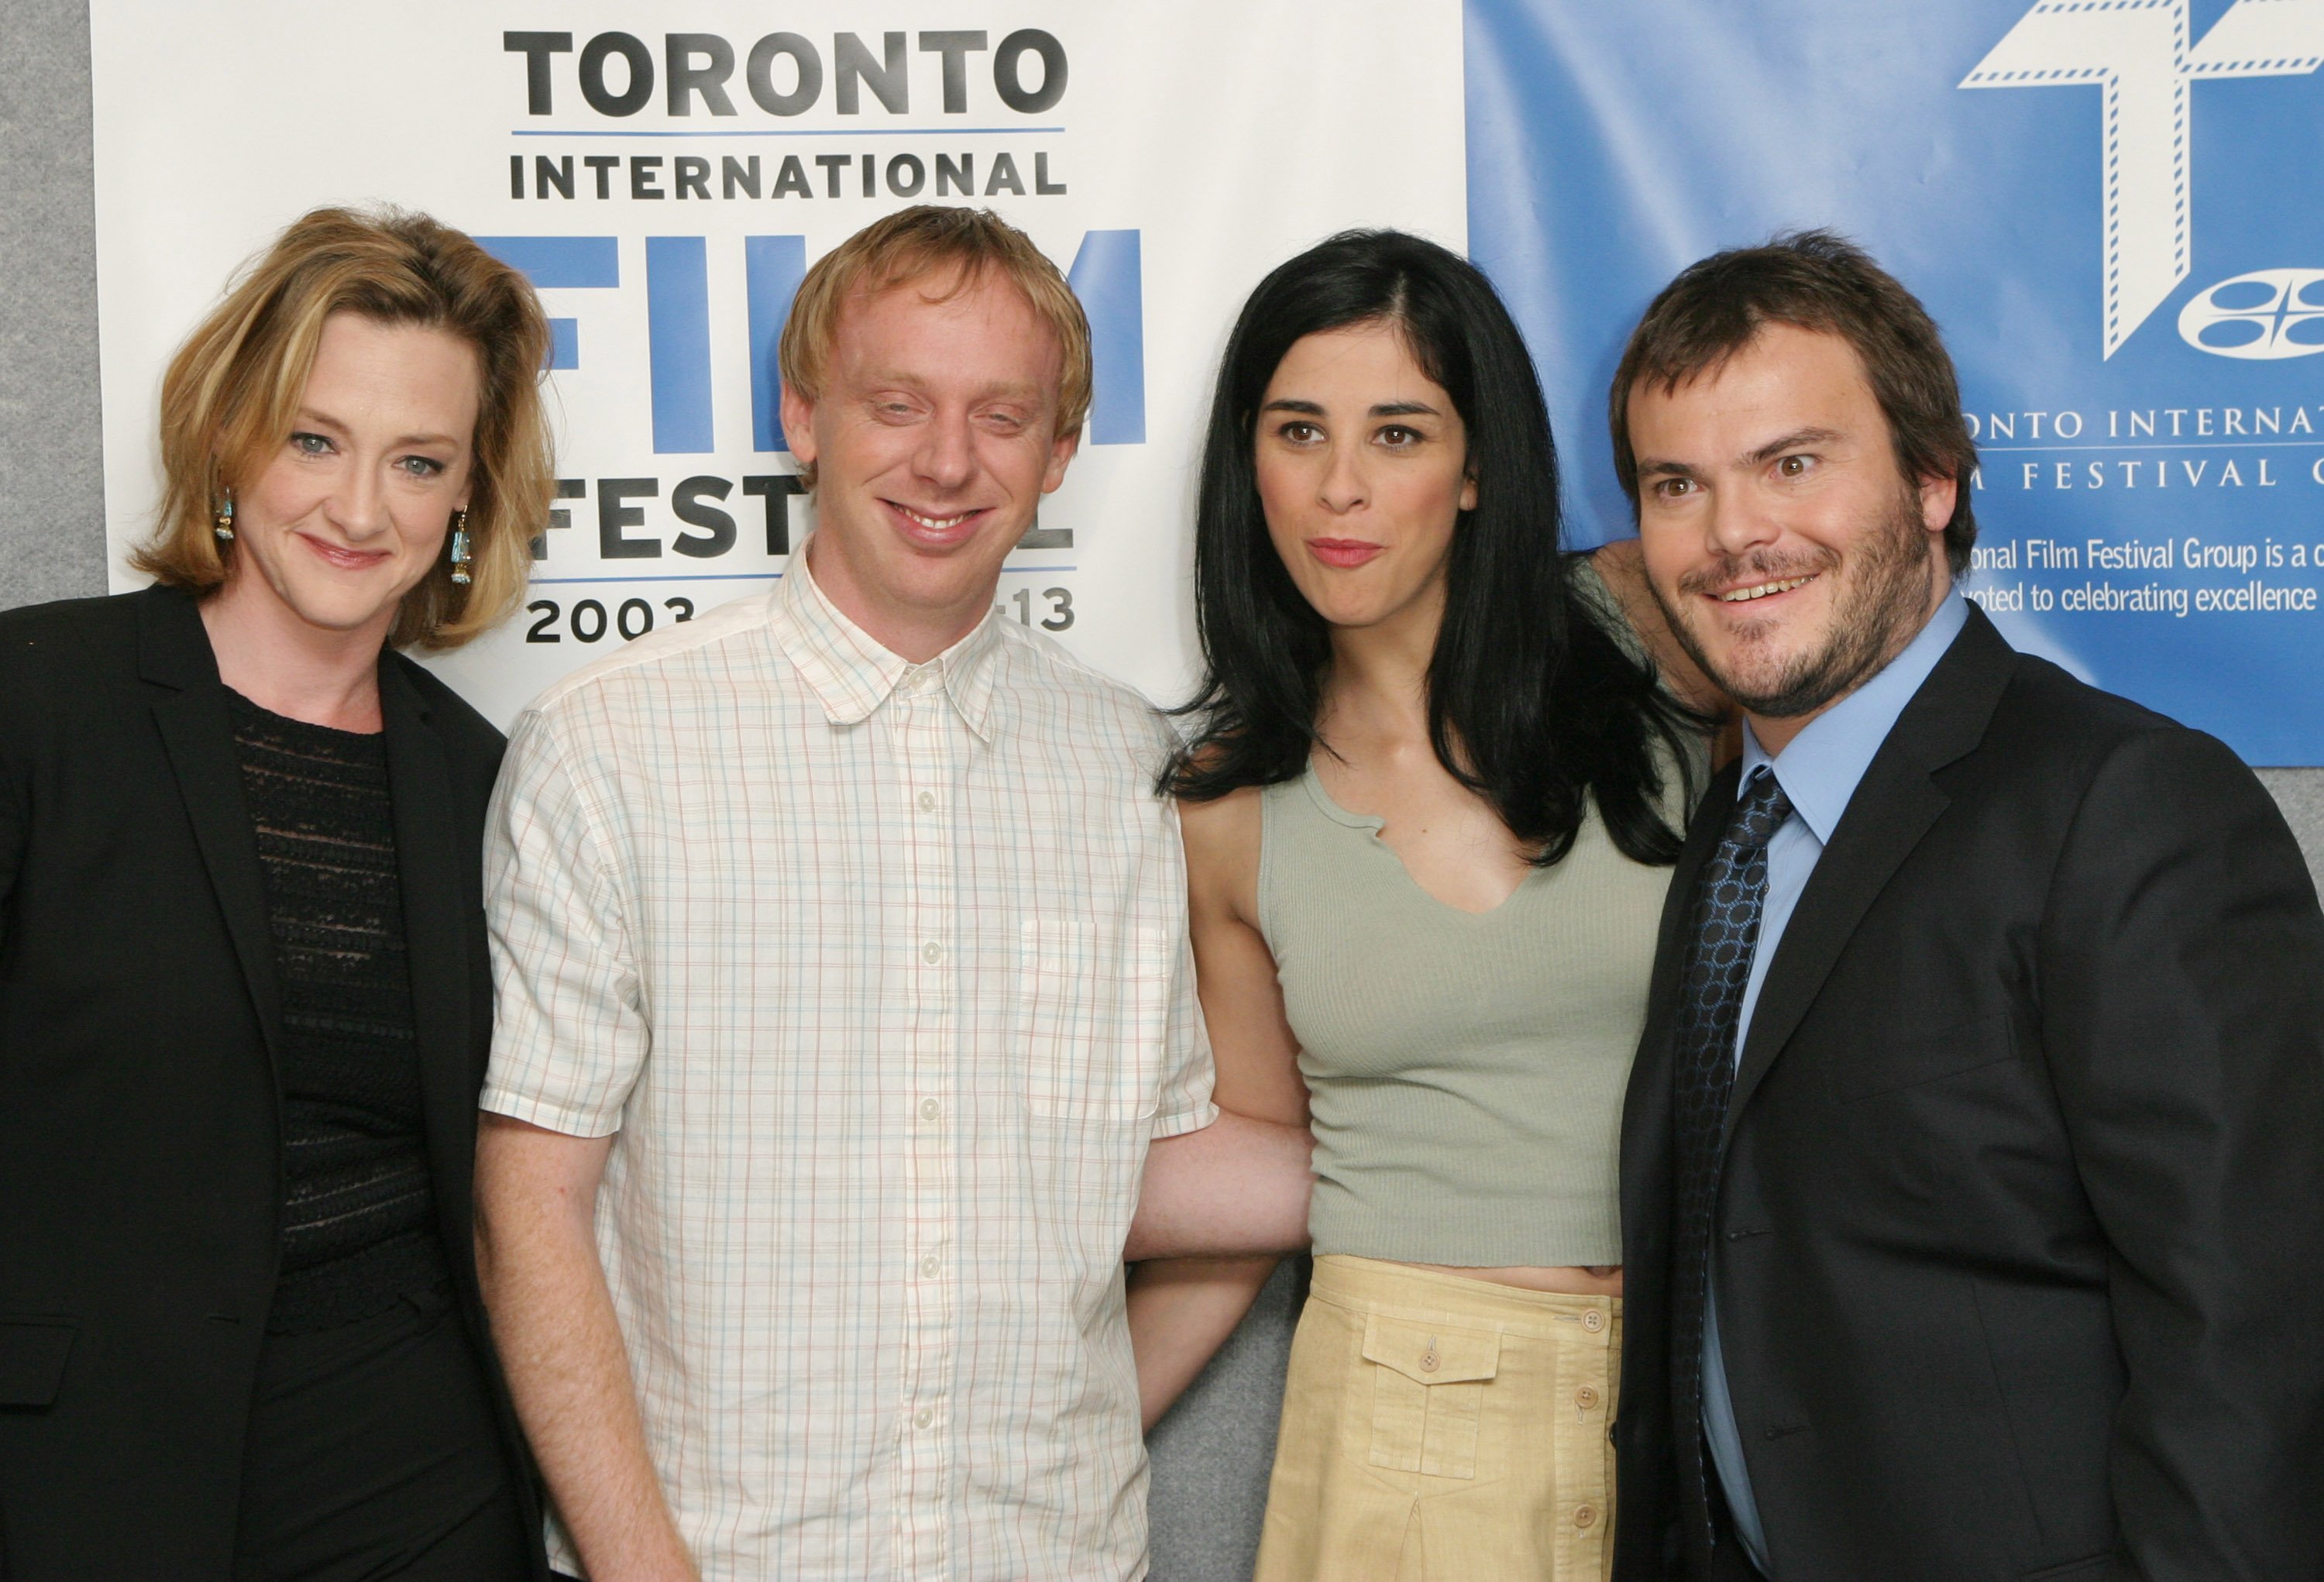 Joan Cusack, Mike White, Sarah Silverman & Jack Black at the Toronto film festival in 2003 | Photo: Getty Images